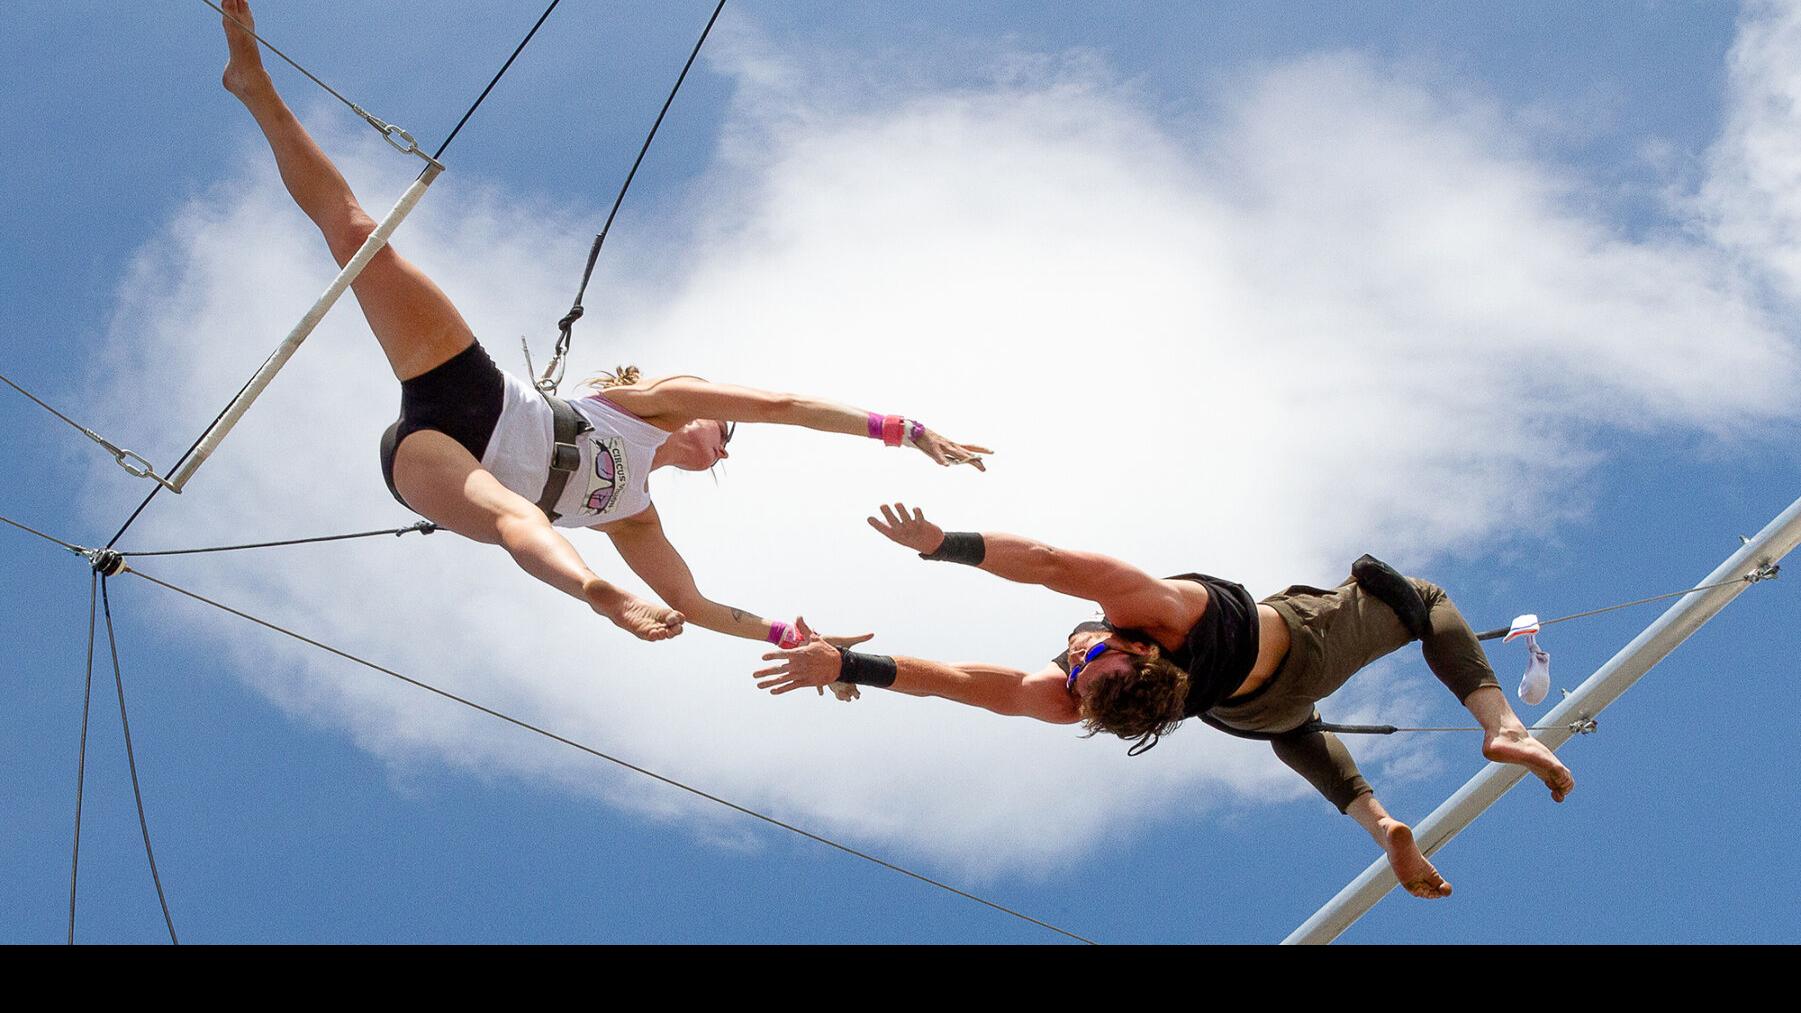 Taking to the skies: trapeze classes offered in Garden City this